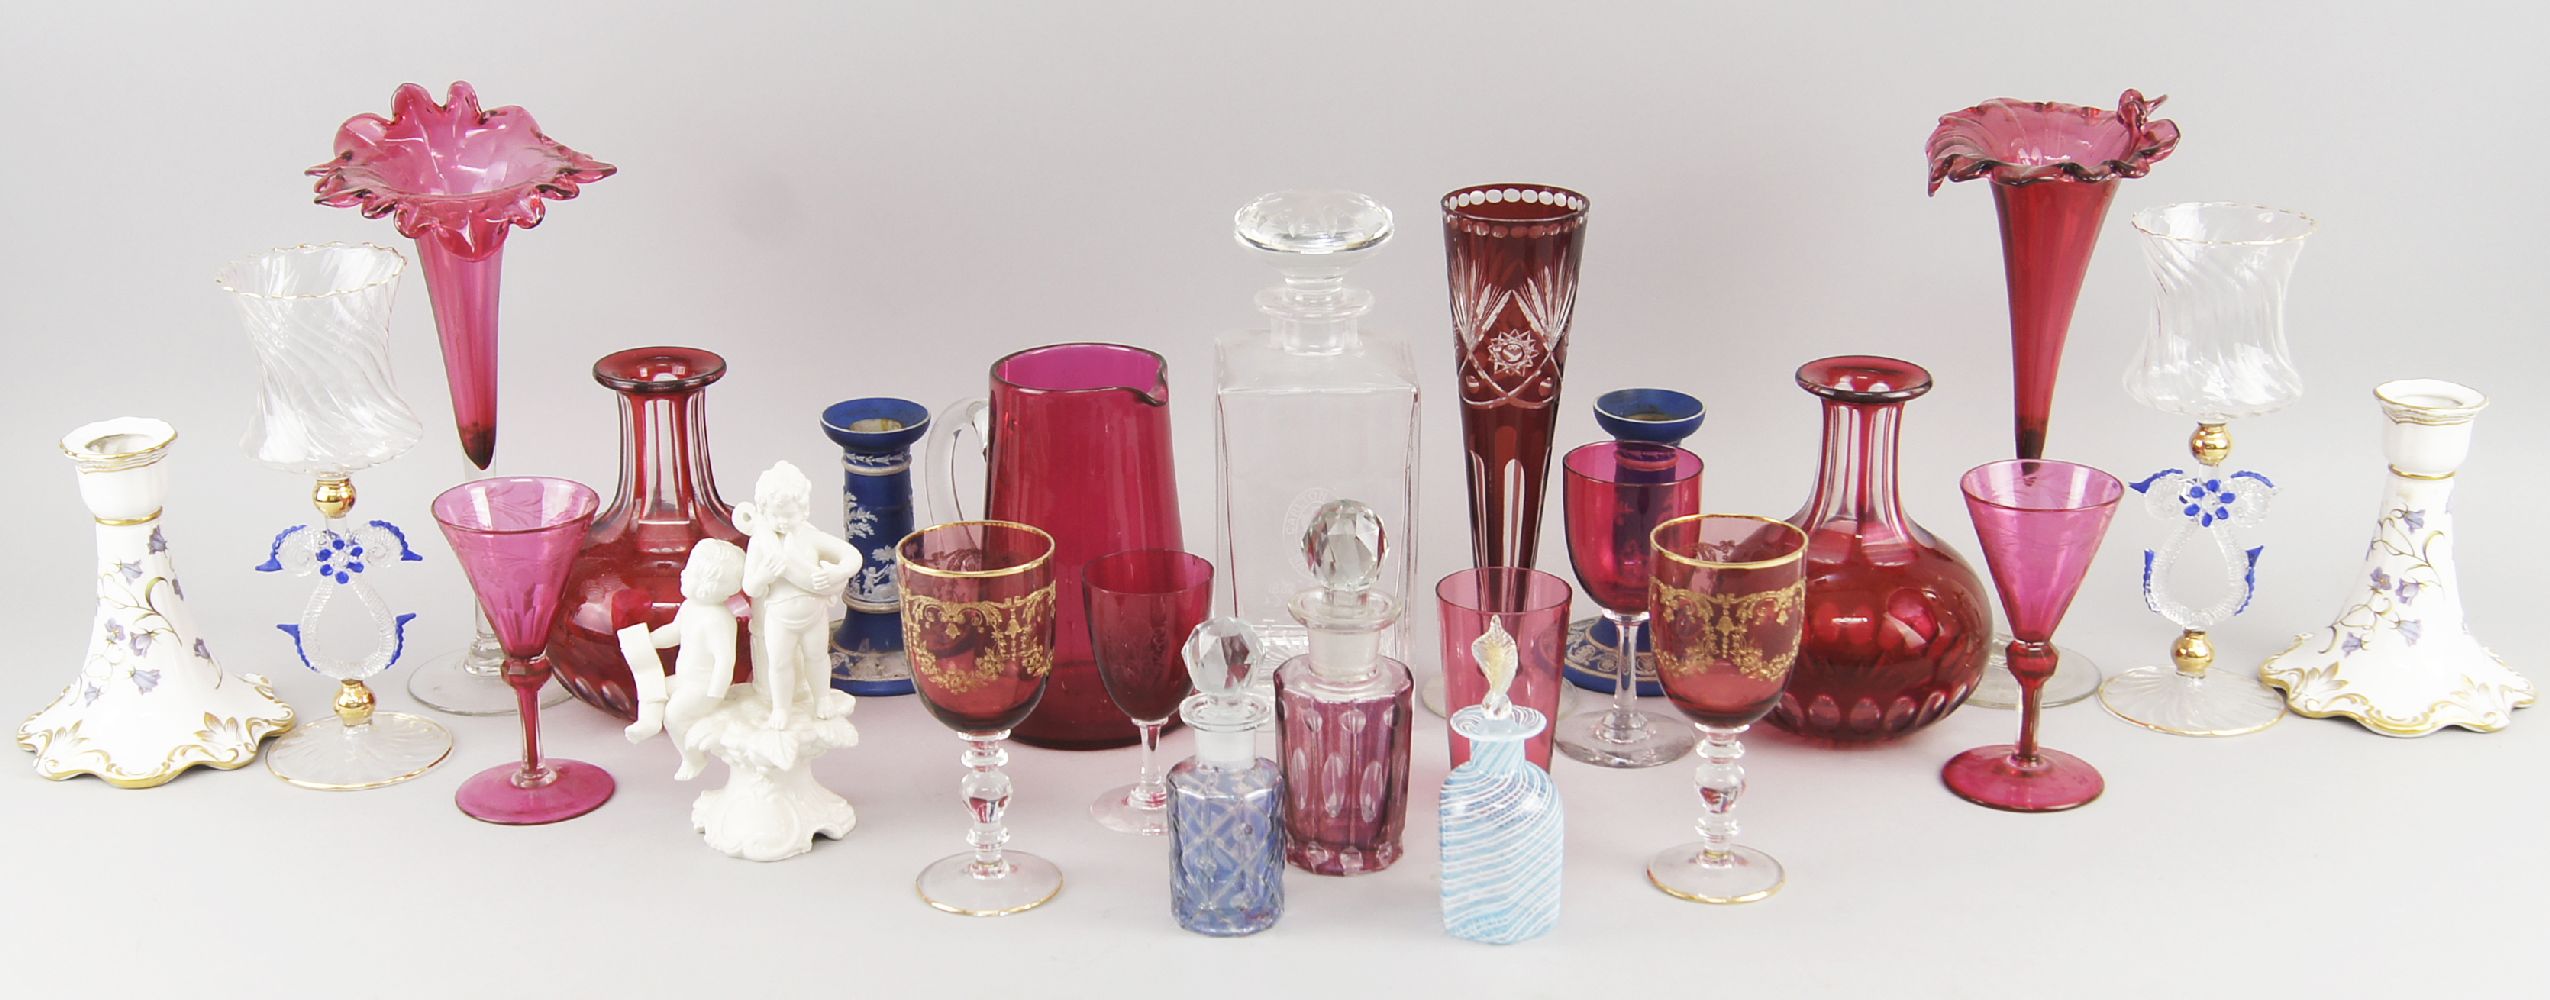 A pair of Venetian type drinking glasses, 22xm high, together with a collection of domestic